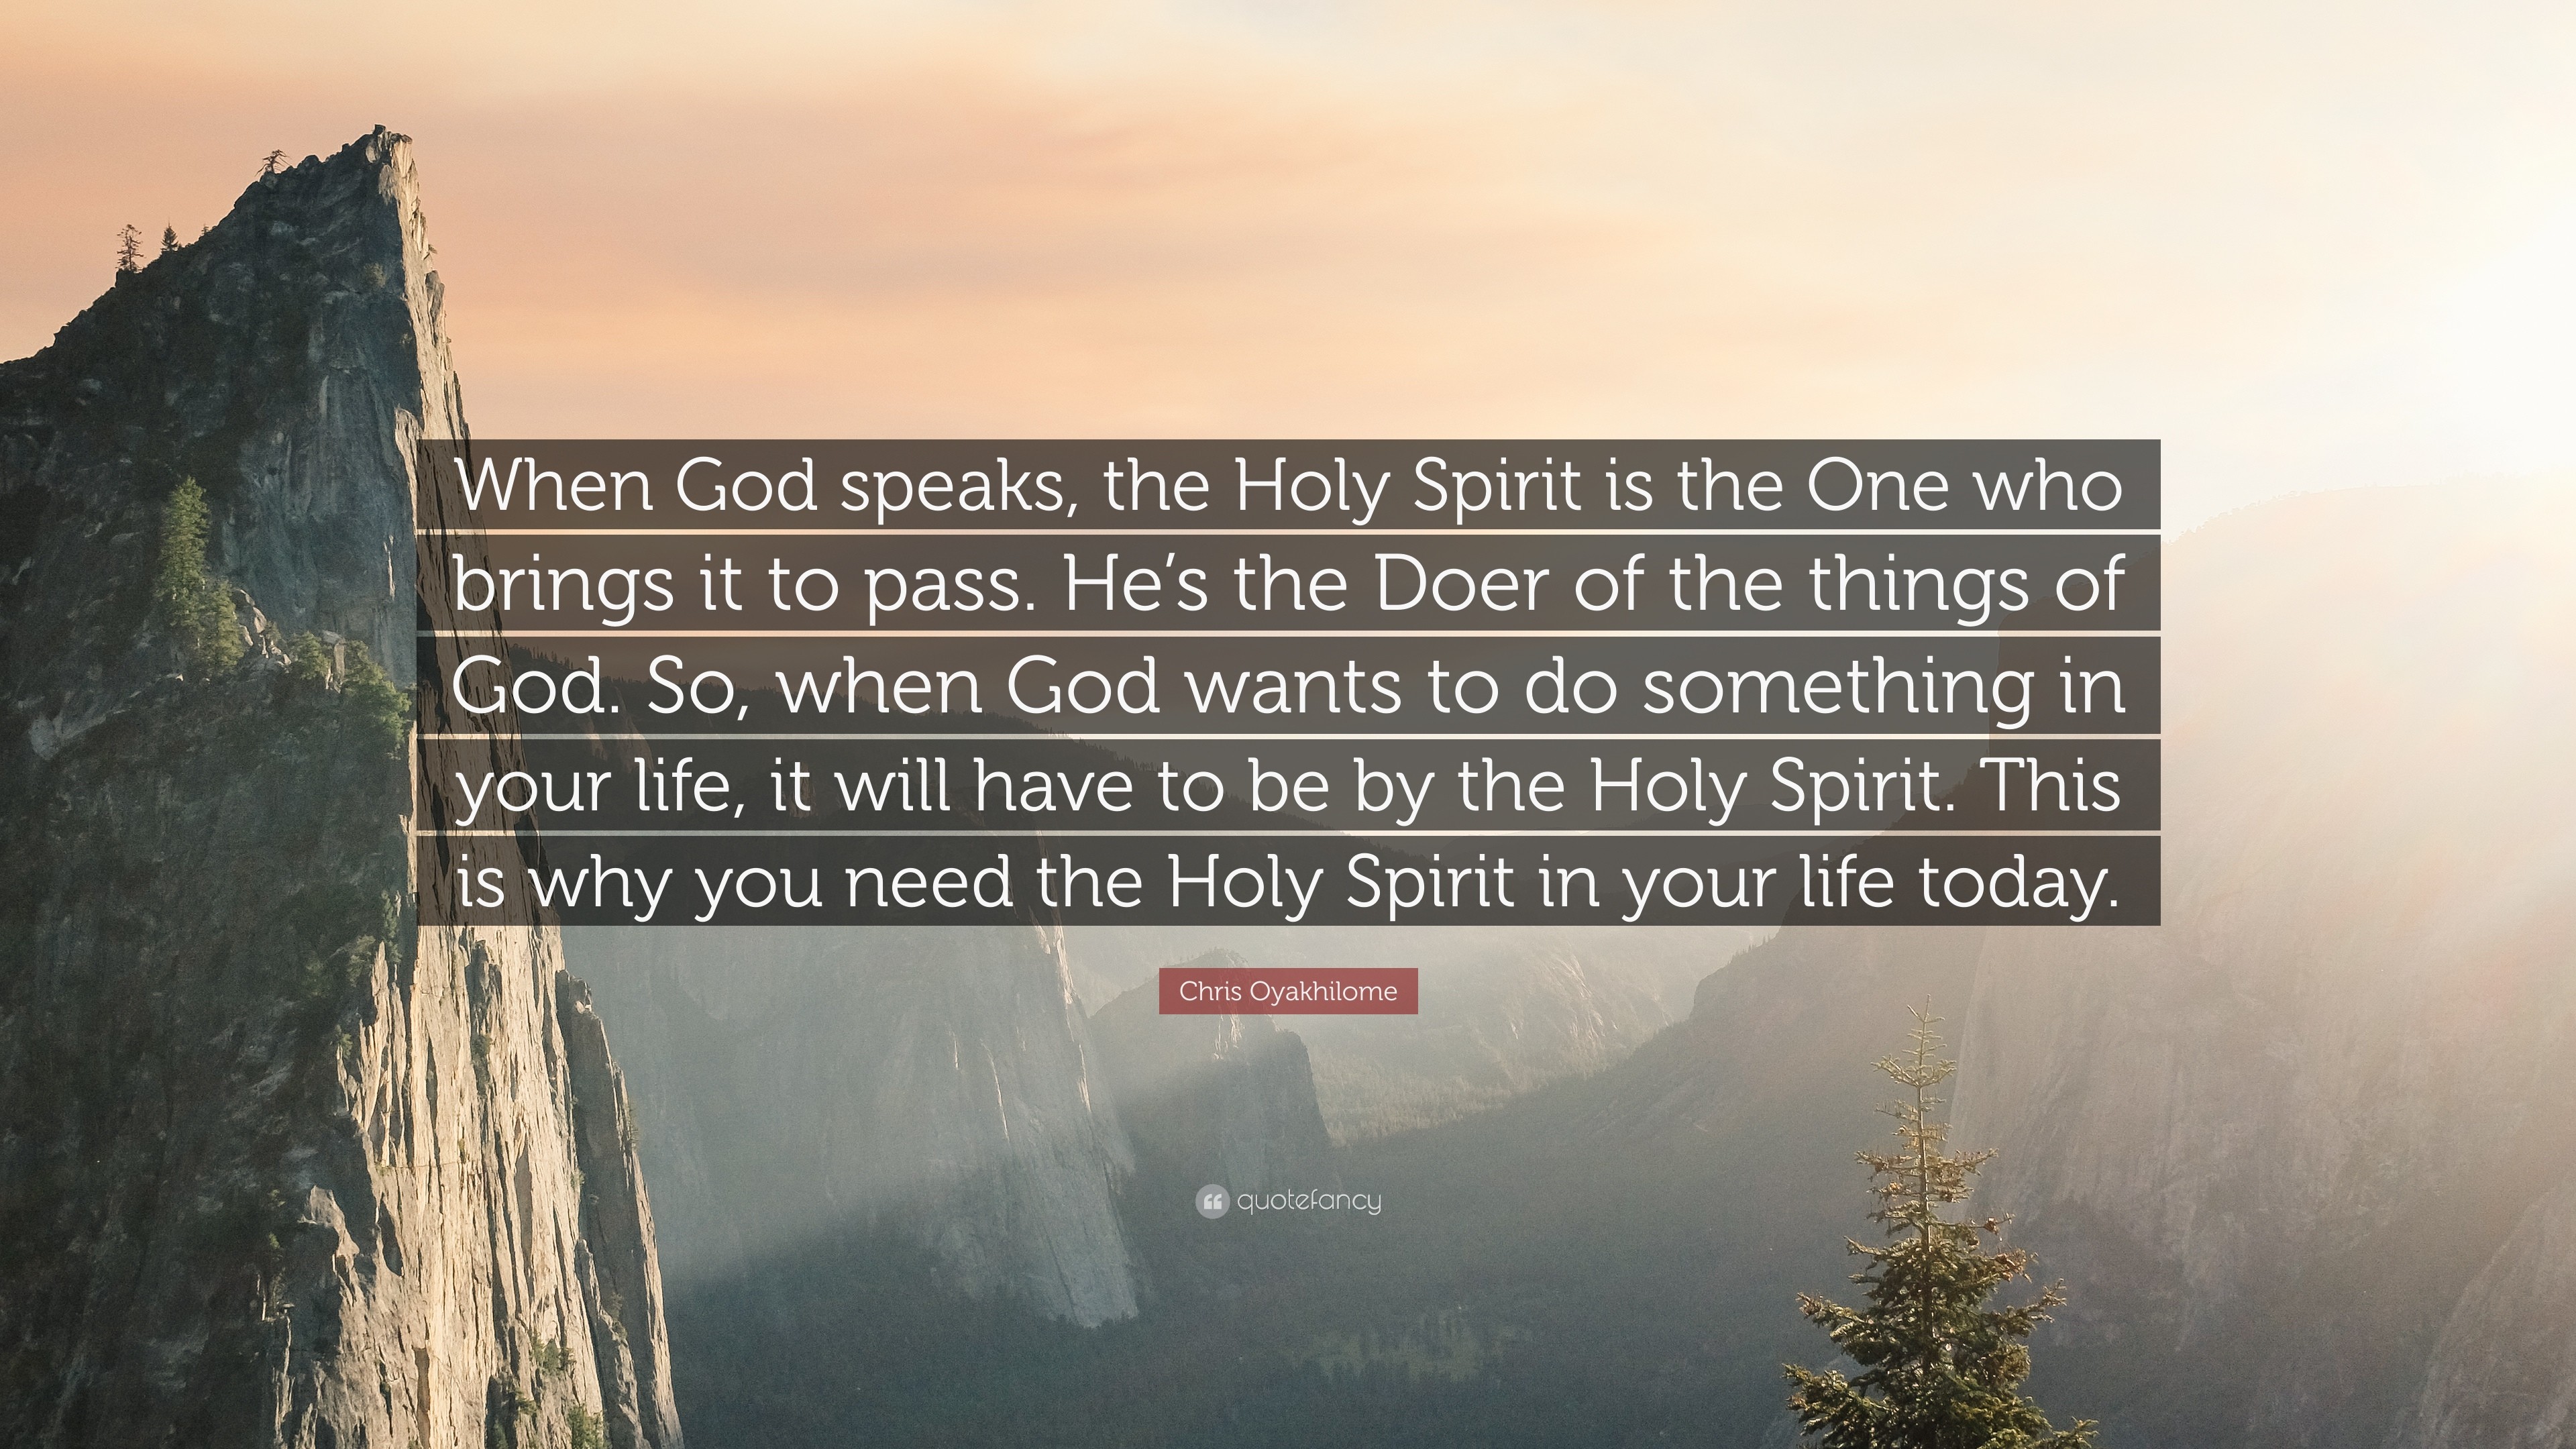 3840x2160 Chris Oyakhilome Quote: “When God speaks, the Holy Spirit is the One who